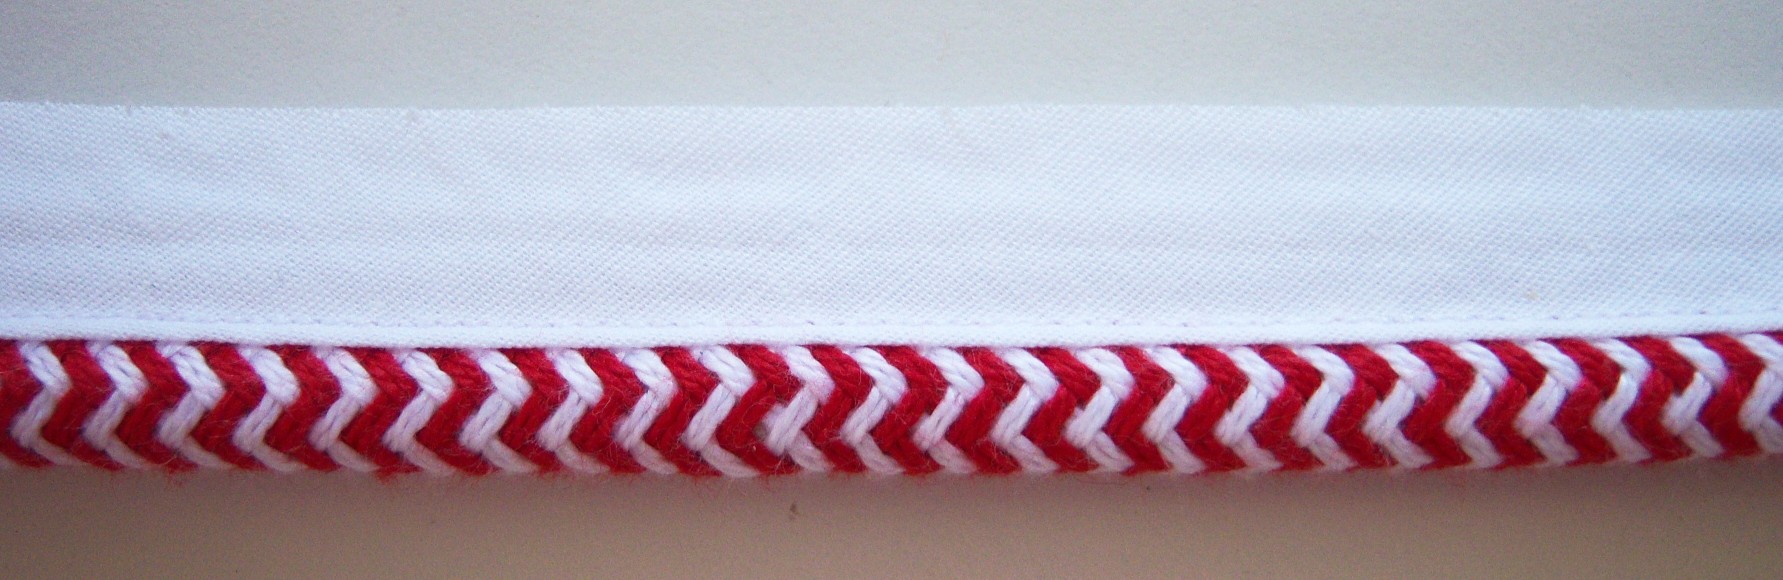 White/Red 3/8" Striped Piping